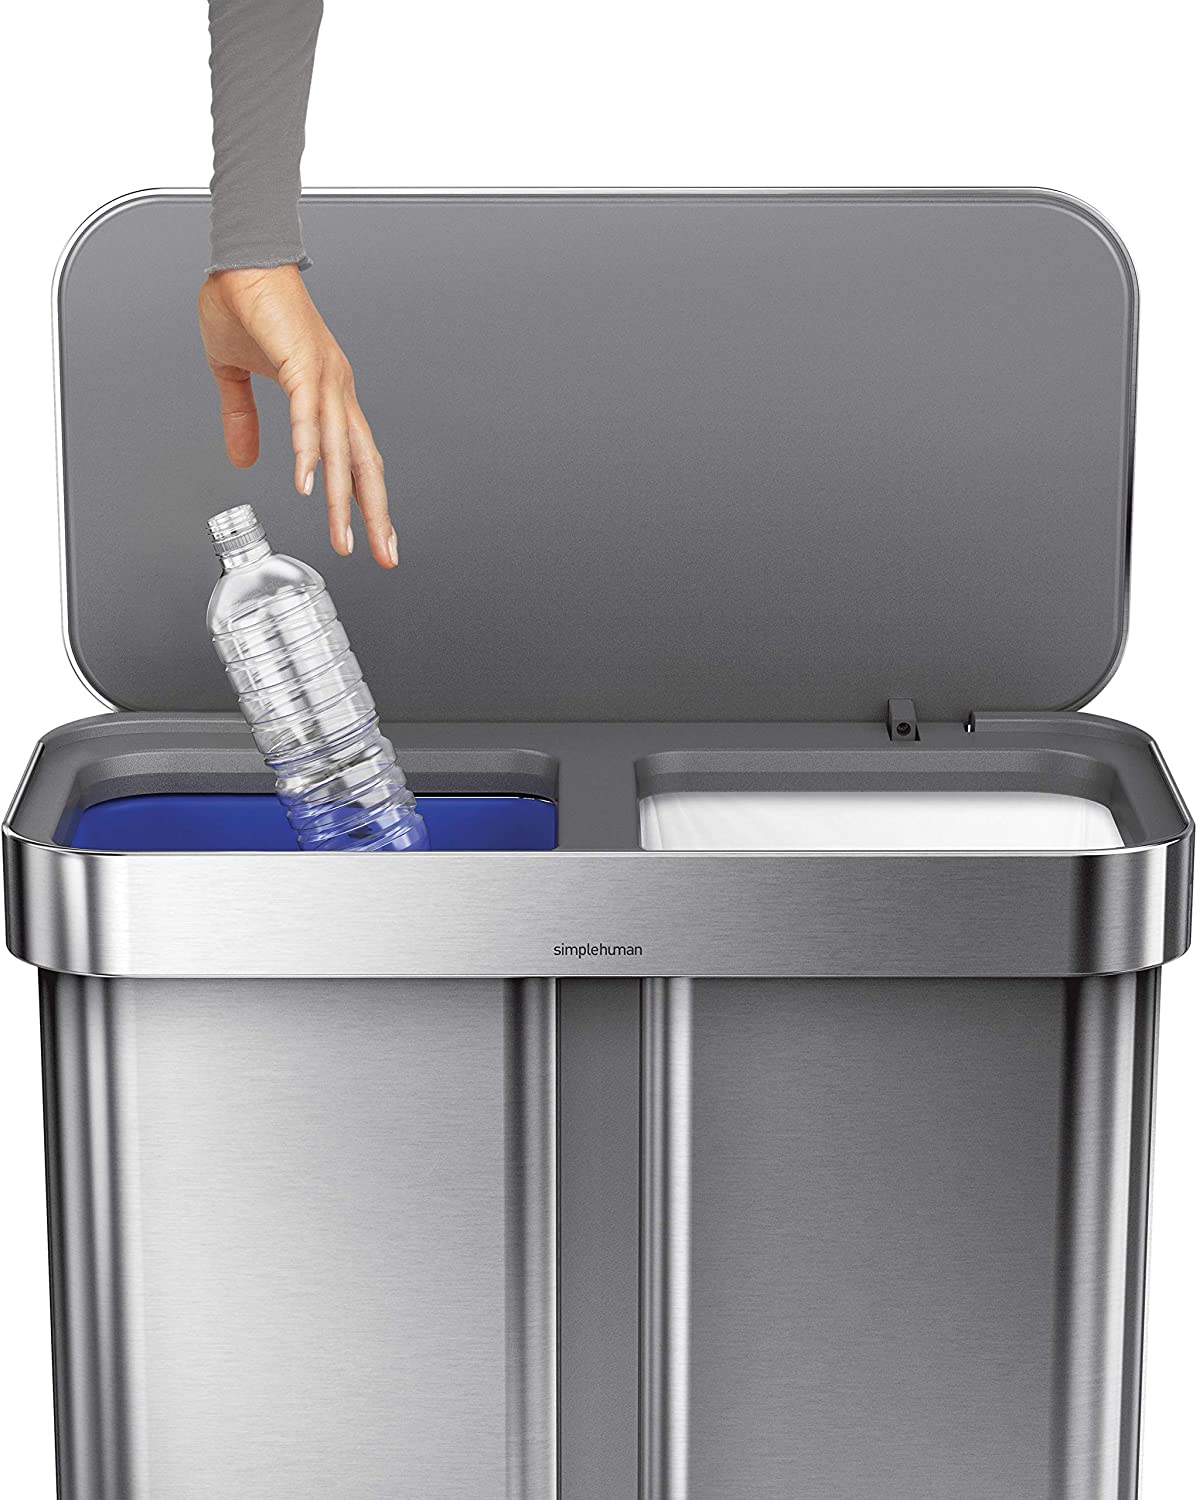 https://bigbigmart.com/wp-content/uploads/2023/05/simplehuman-58-Liter-15.3-Gallon-Rectangular-Hands-Free-Dual-Compartment-Recycling-Kitchen-Step-Trash-Can-with-Soft-Close-Lid-Brushed-Stainless-Steel3.jpg